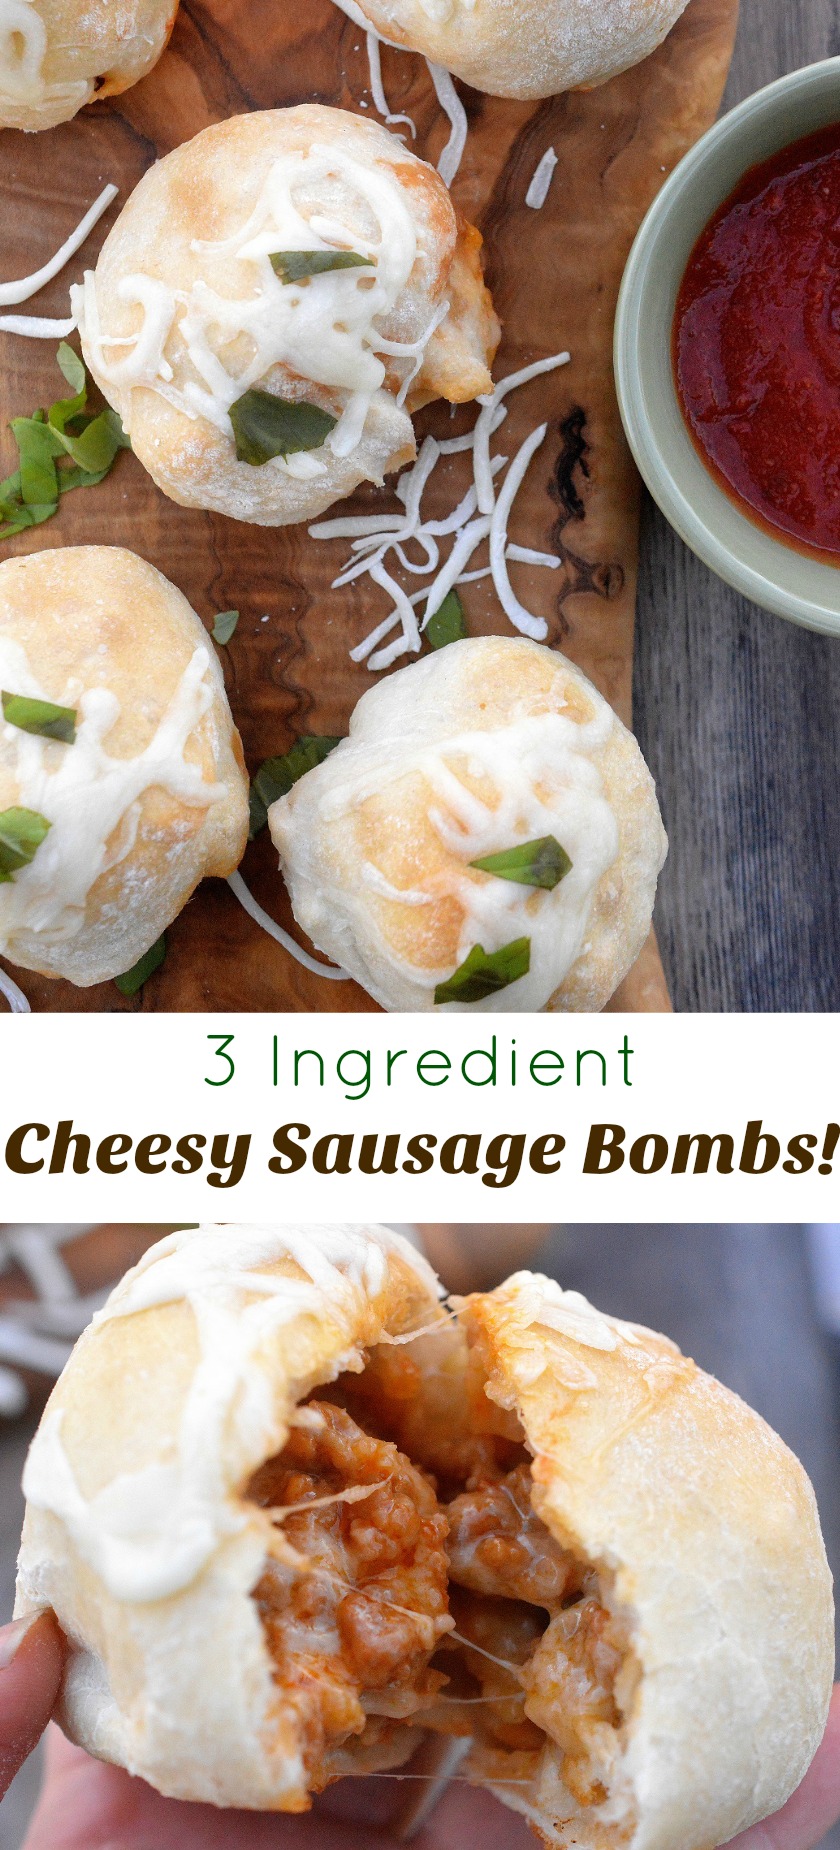 Cheesy Sausage Bombs! warm pizza dough filled with hot or sweet Italian sausage and Mozzarella cheese...Yum! 